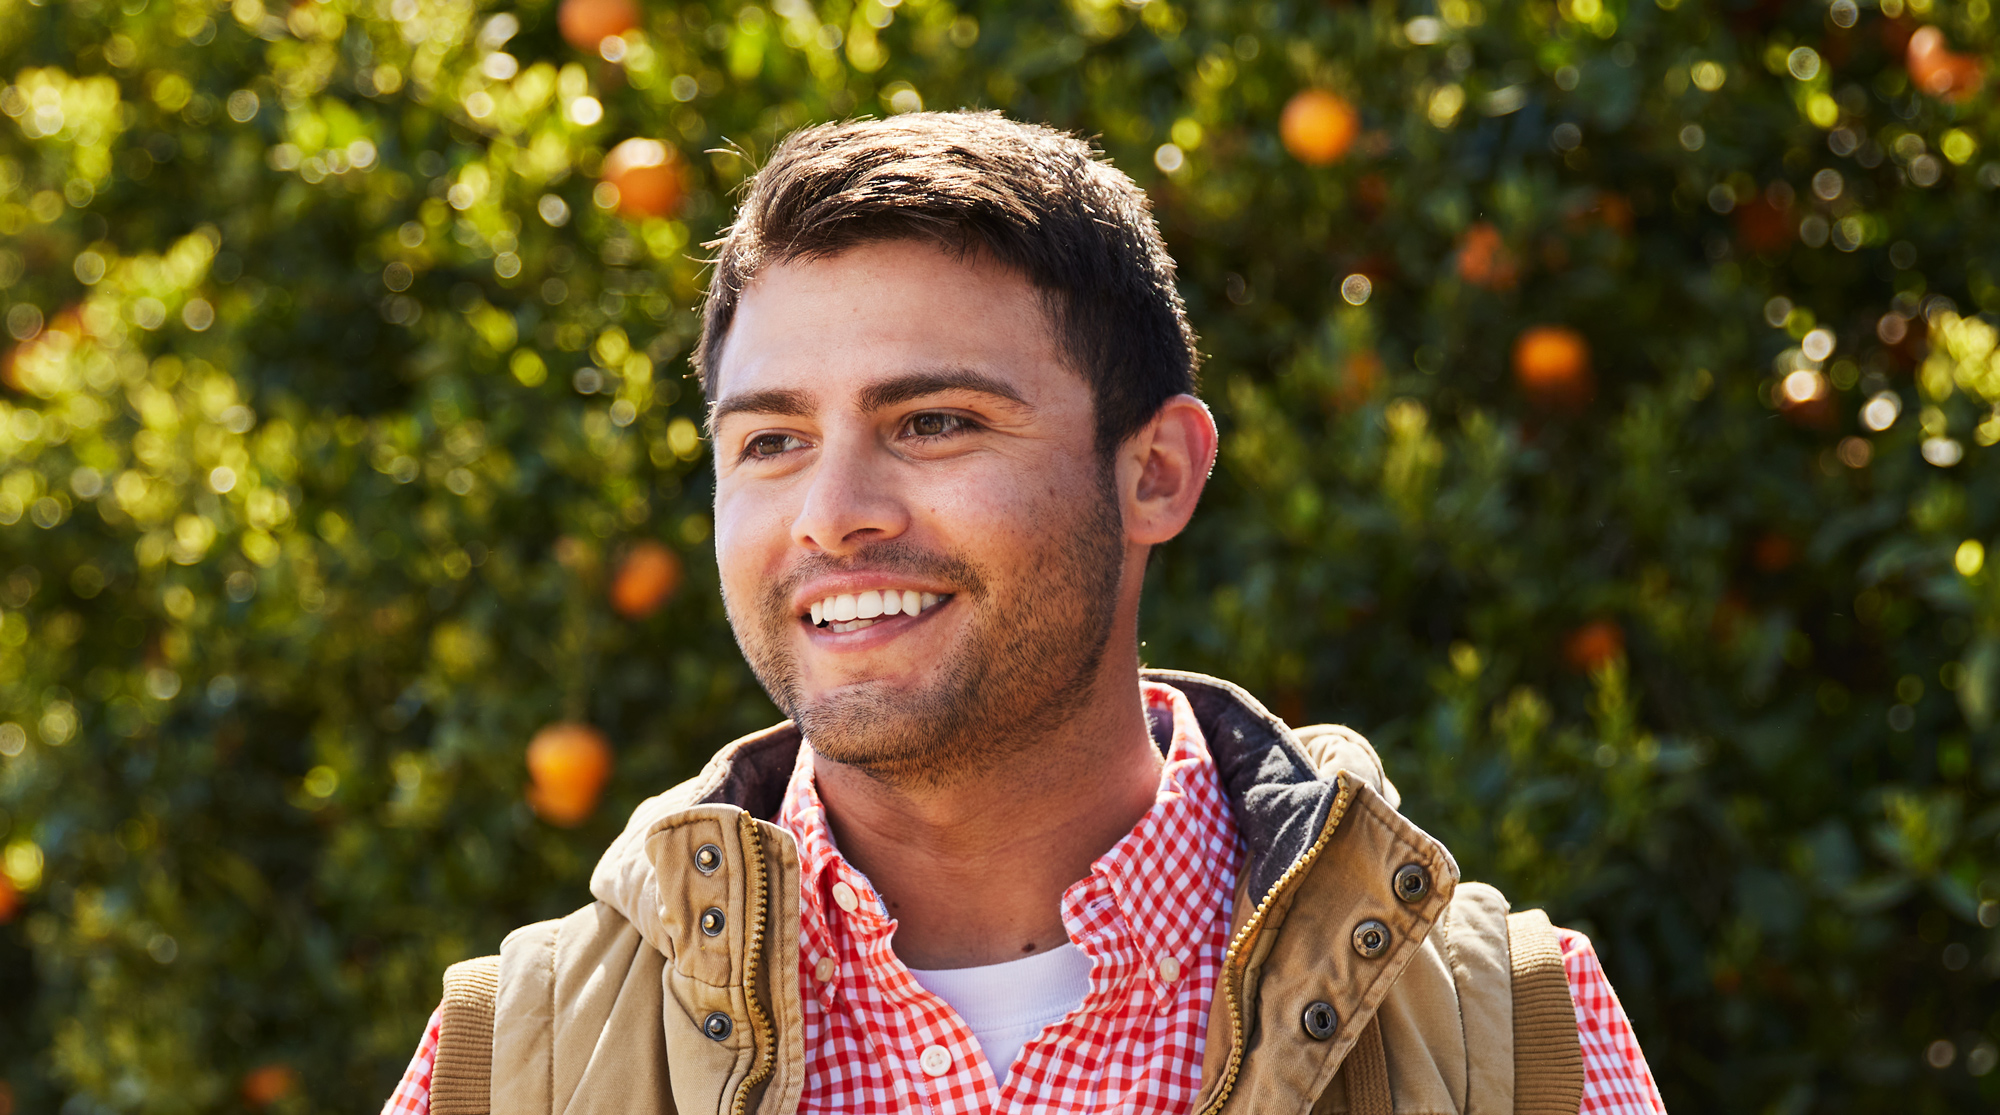 A man wearing a red flannel is standing in front of a tall bush of citrus and smiling